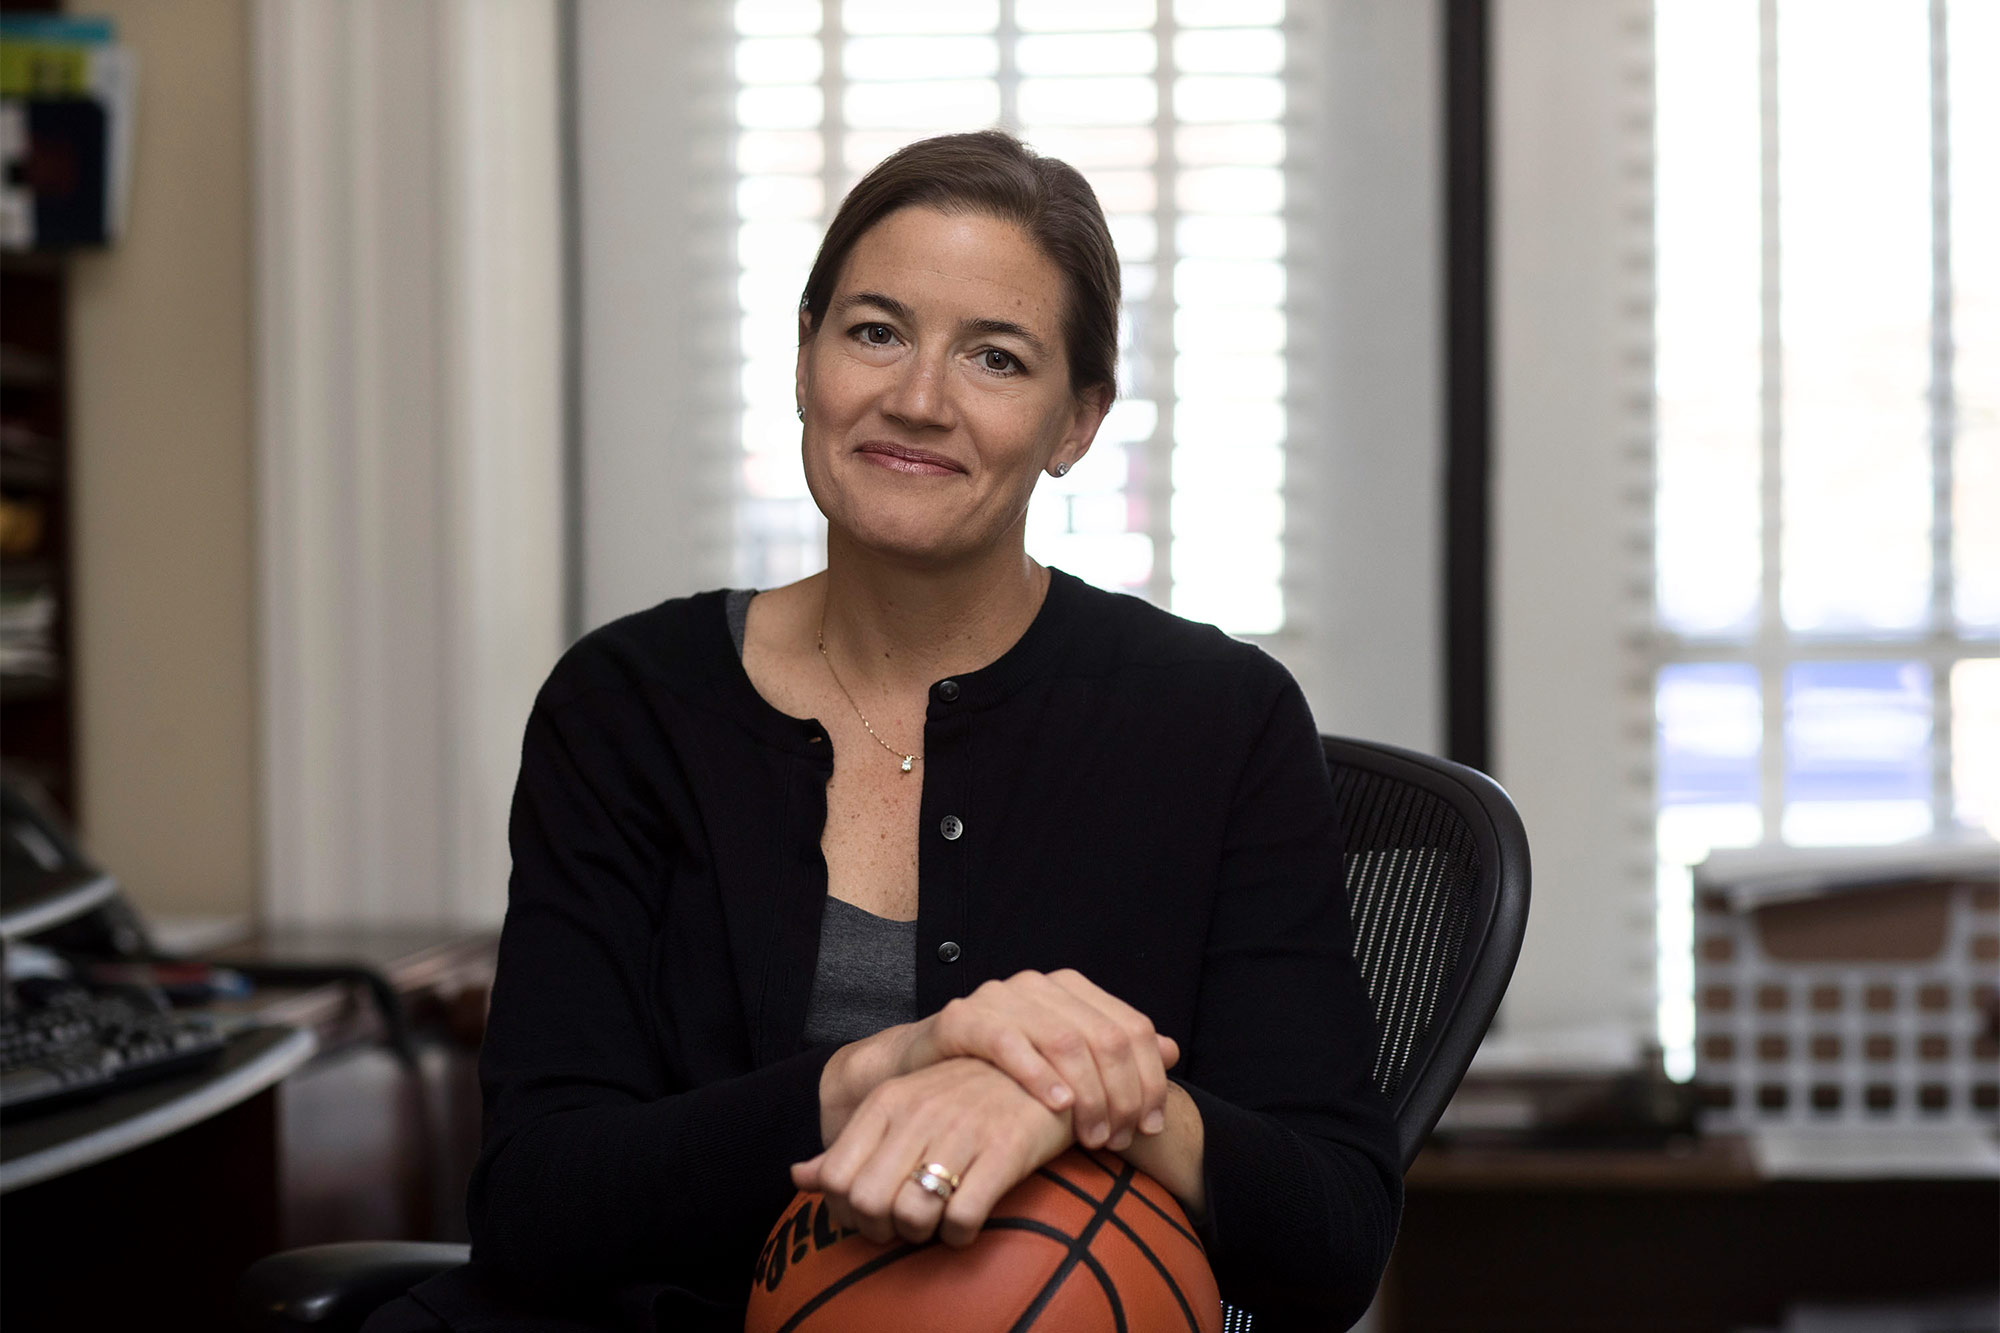 Carrie Heilman sits at a desk, with her hands resting on a basketball in her lap, and smiles at the camera